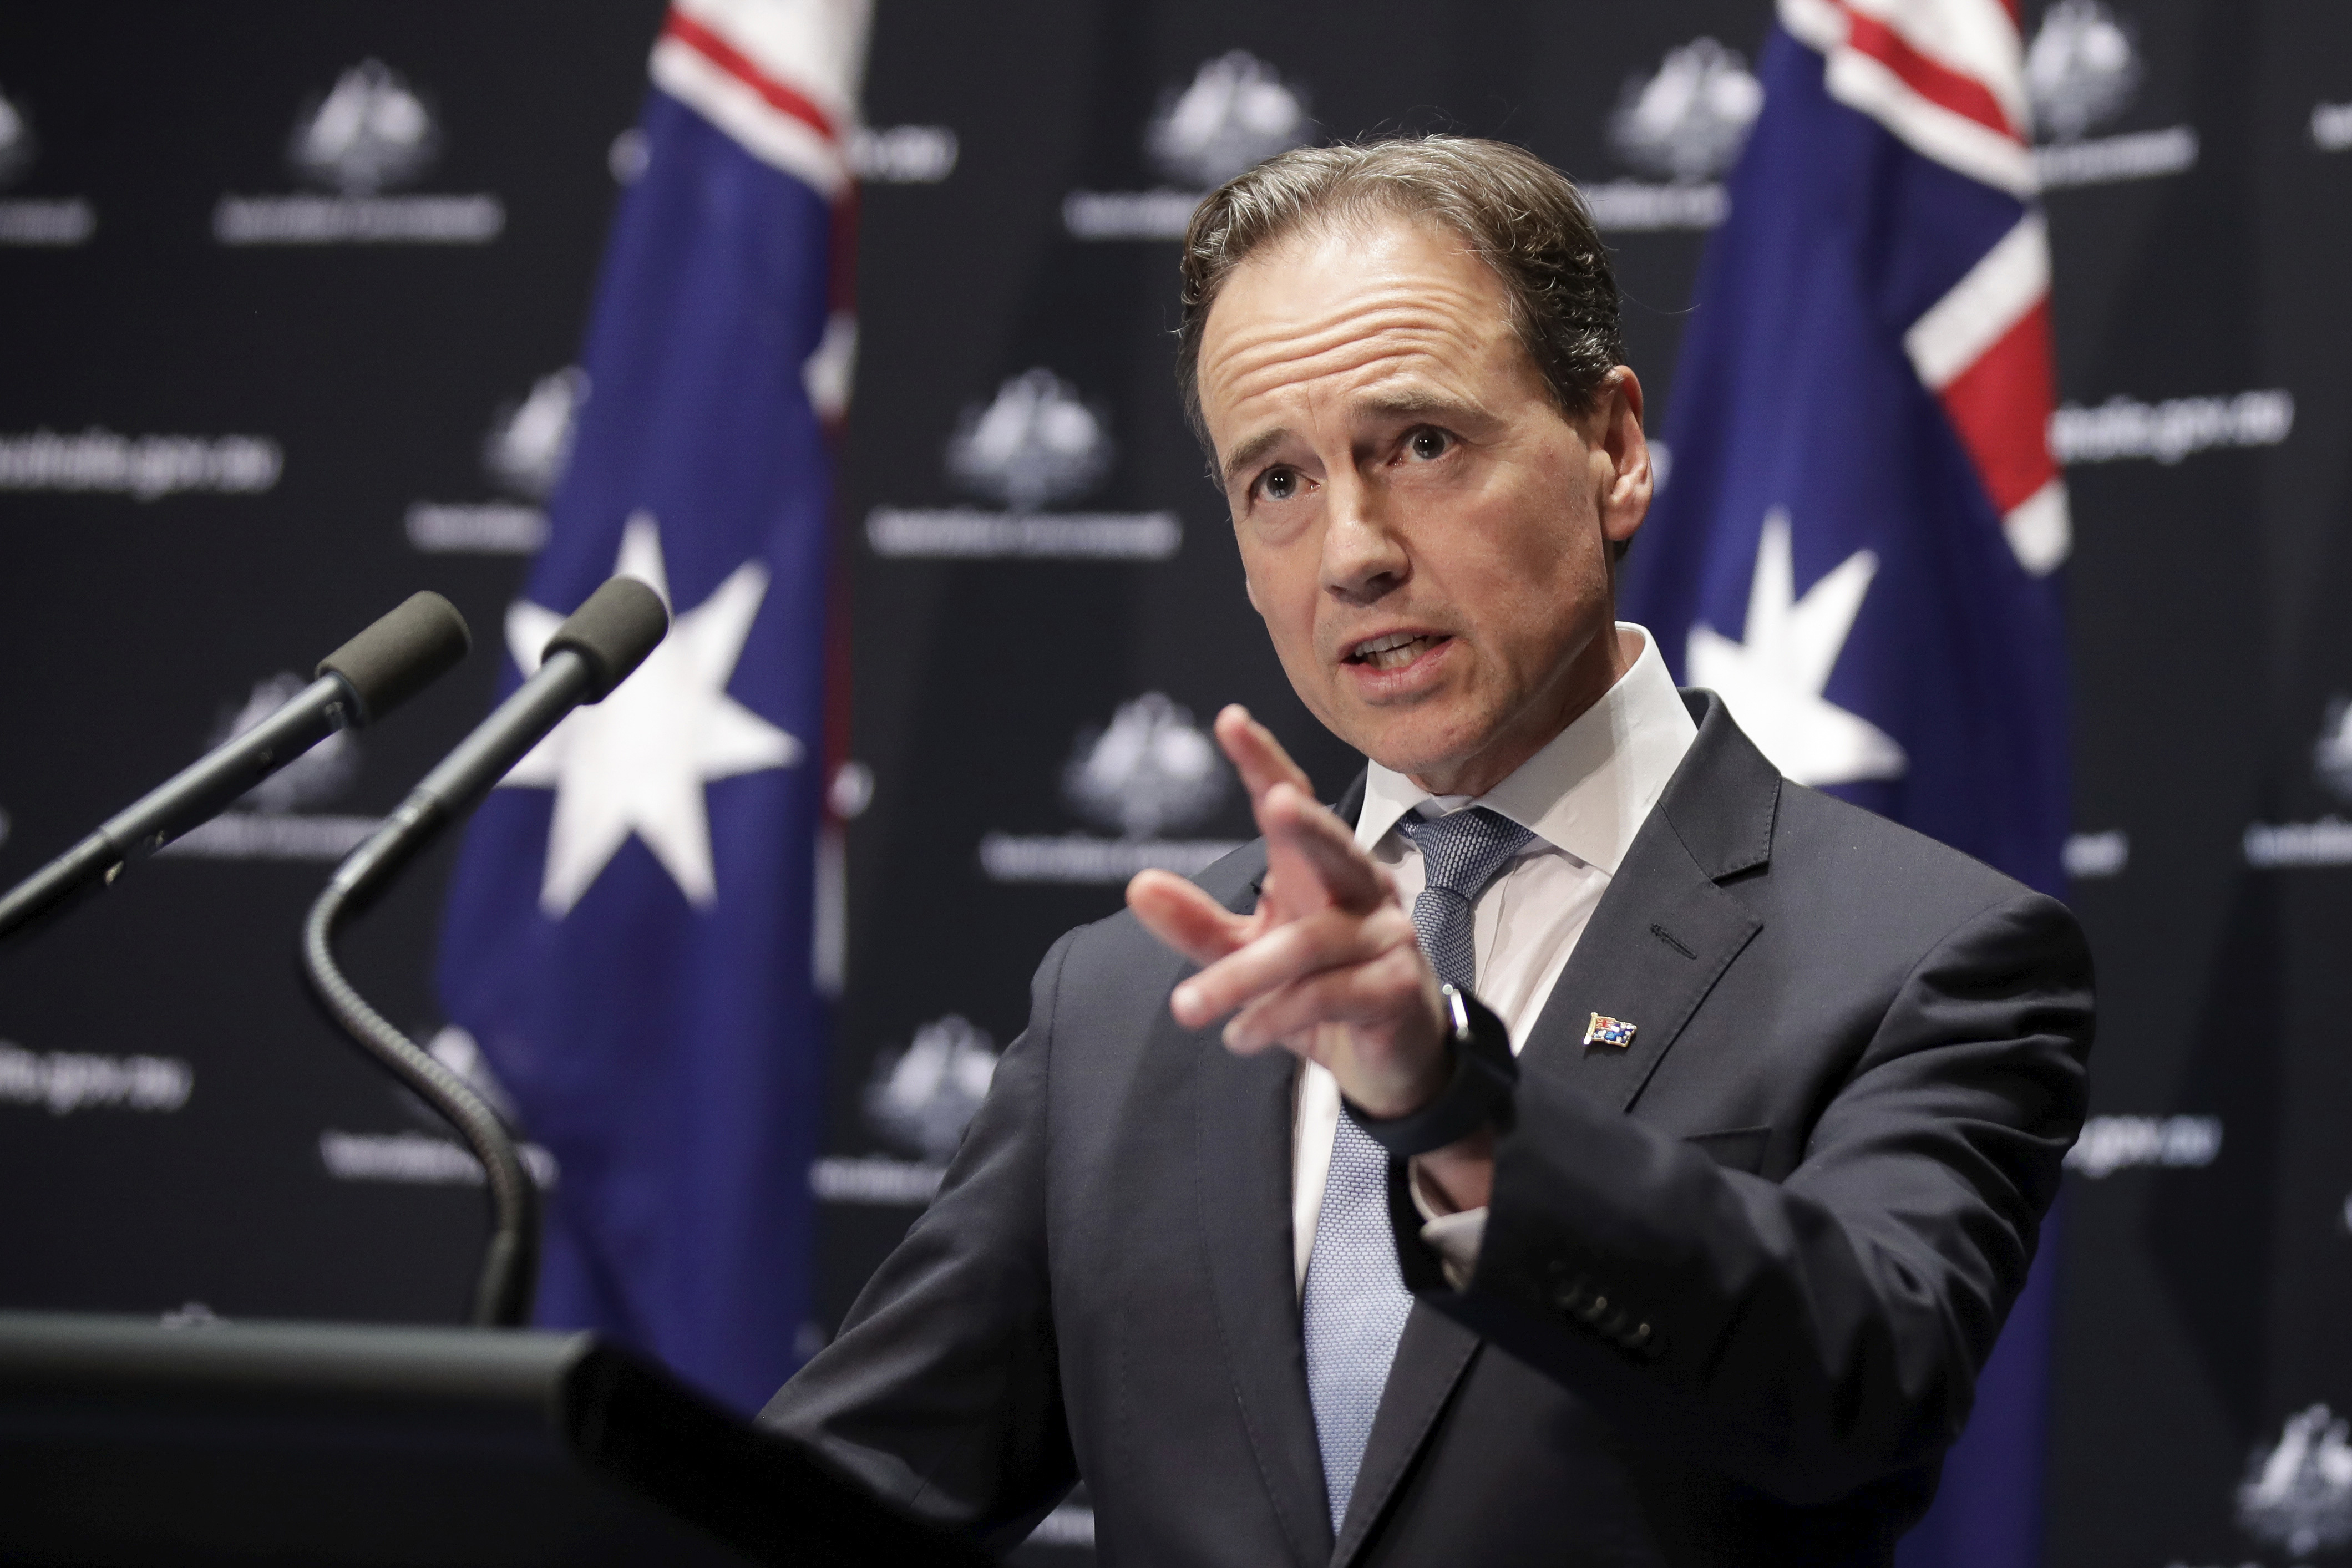 Minister for Health Greg Hunt provides an update on the government's response to the COVID-19 coronavirus pandemic, at Parliament House in Canberra